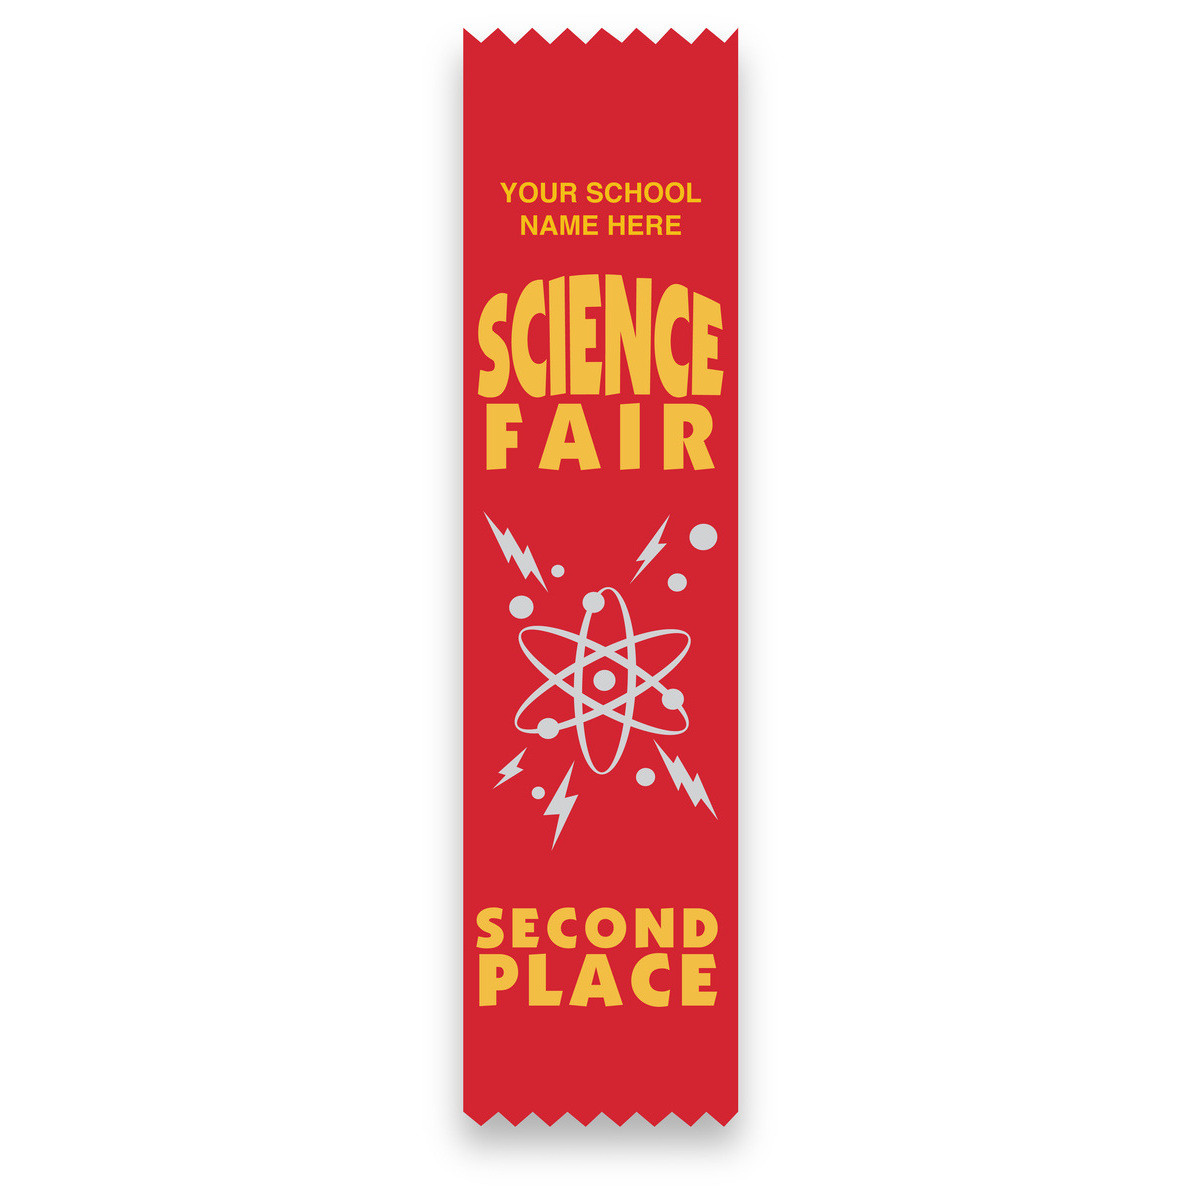 Imprinted Flat Ribbon - Science Fair 2nd Place